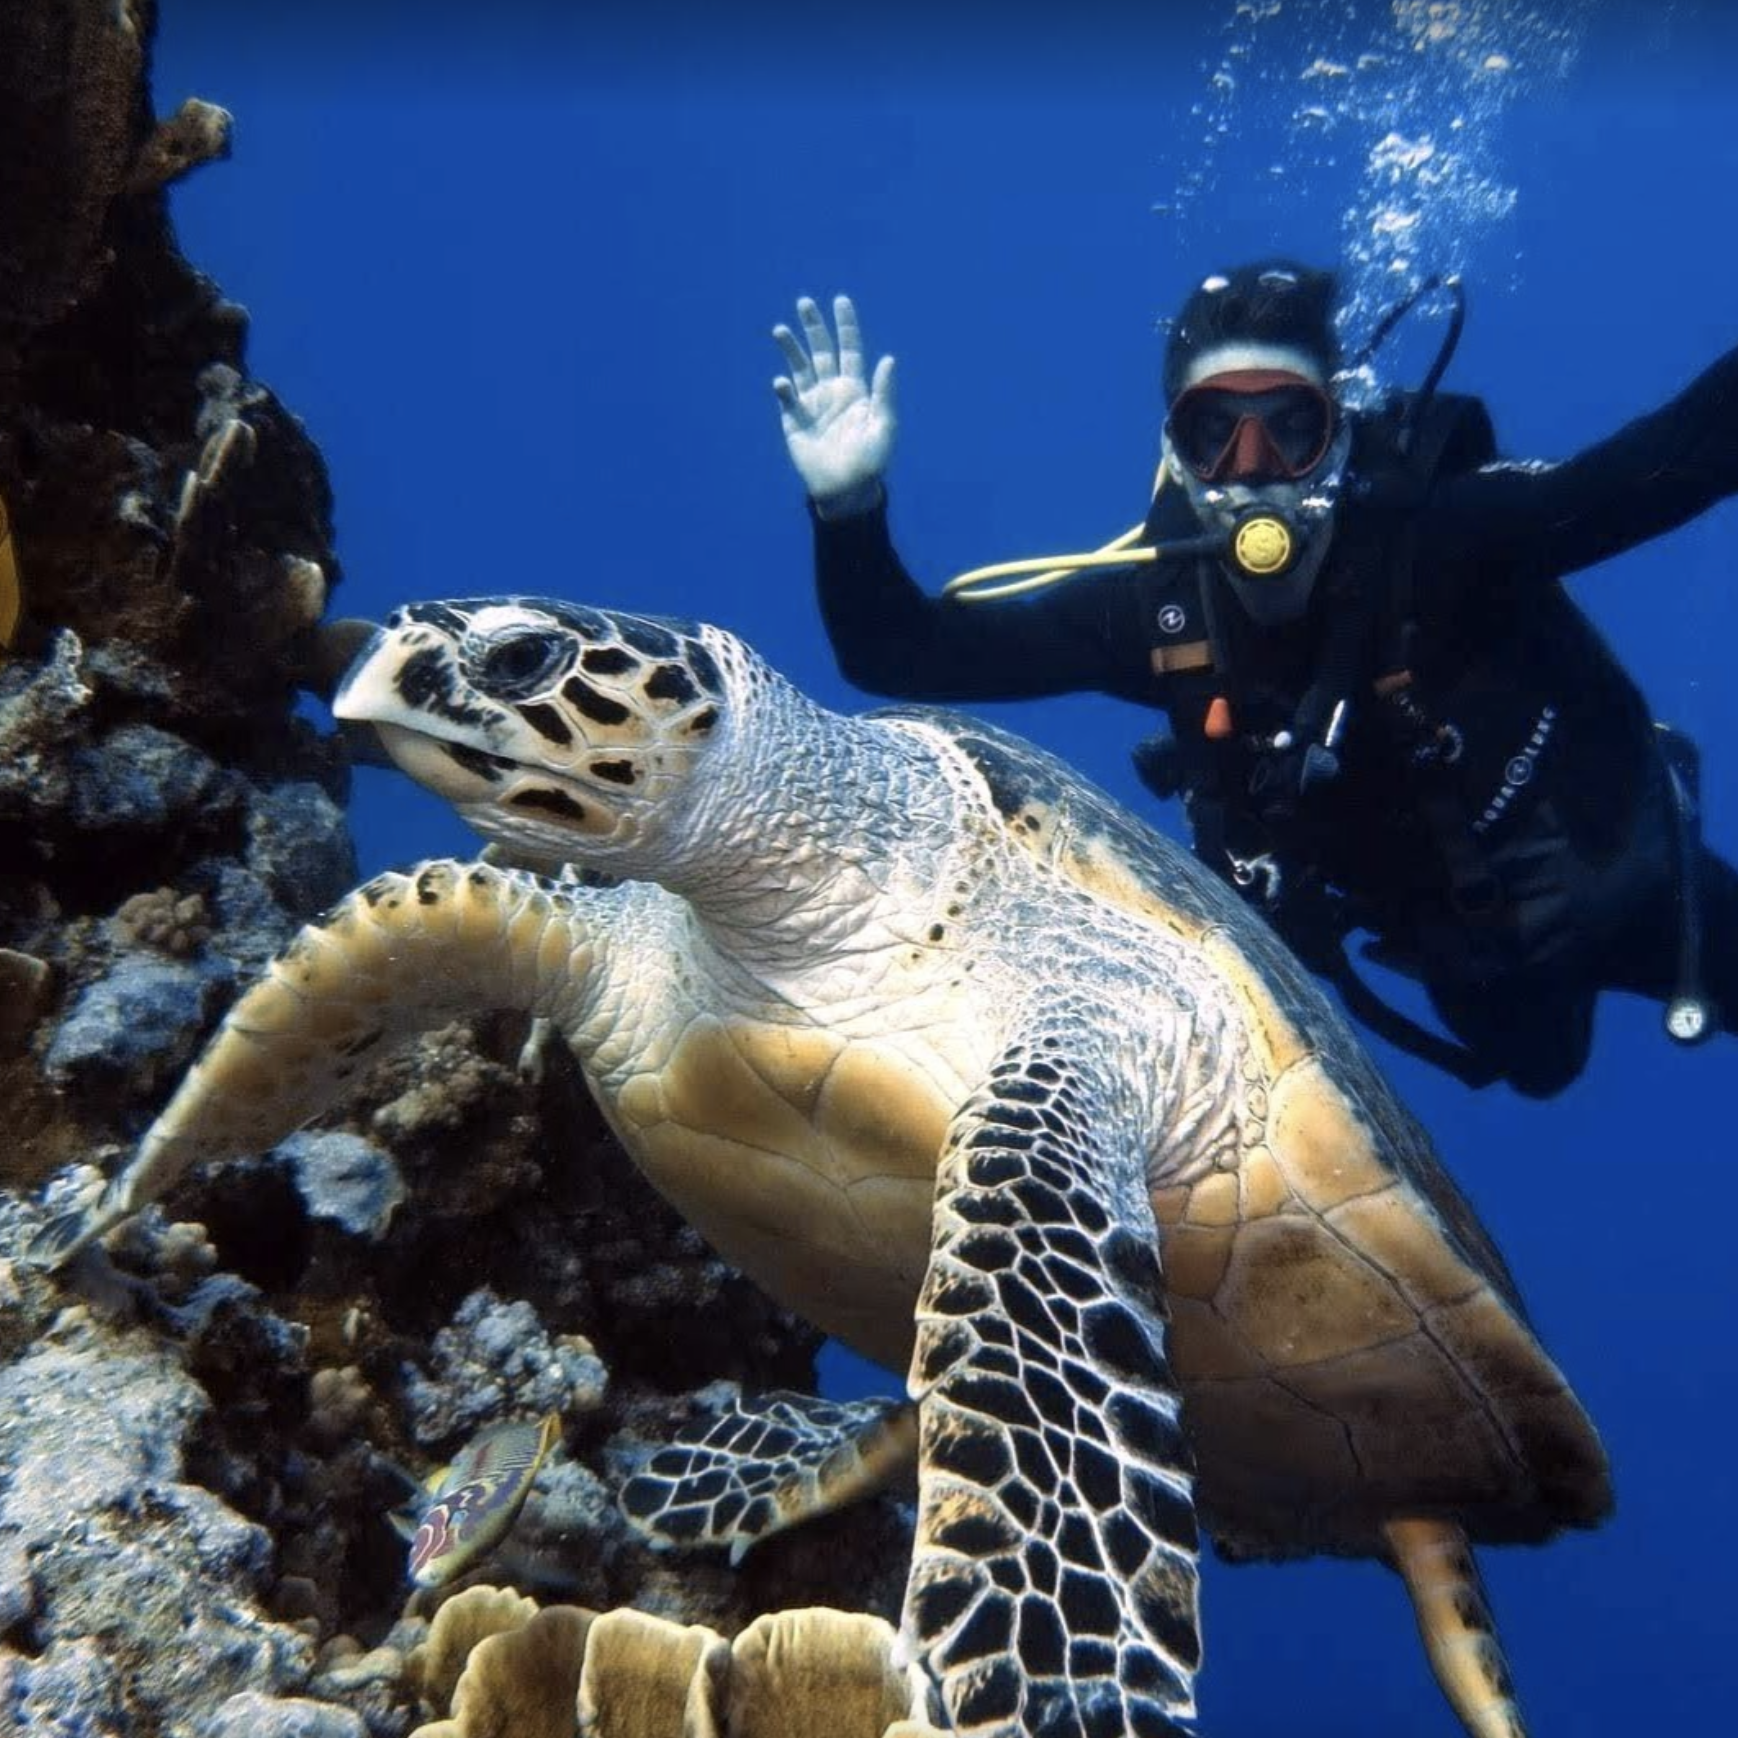 Jannik Luyten diving with a turtle